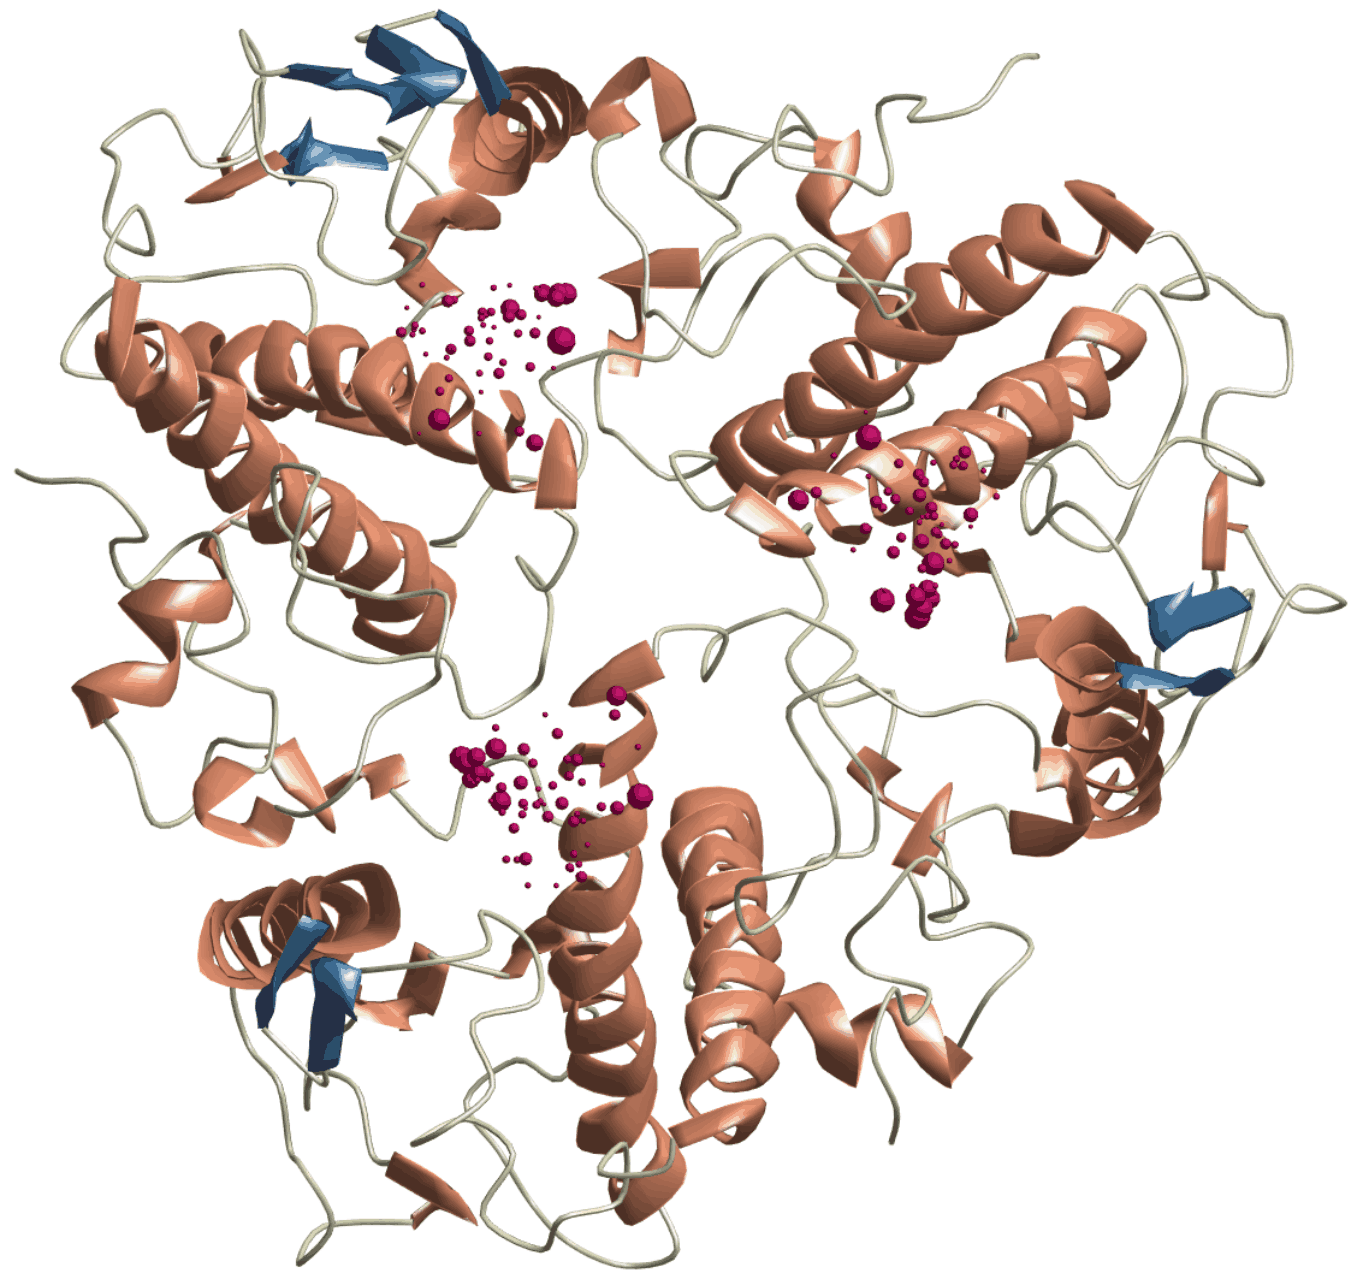 Enlarged view: membrane proteins